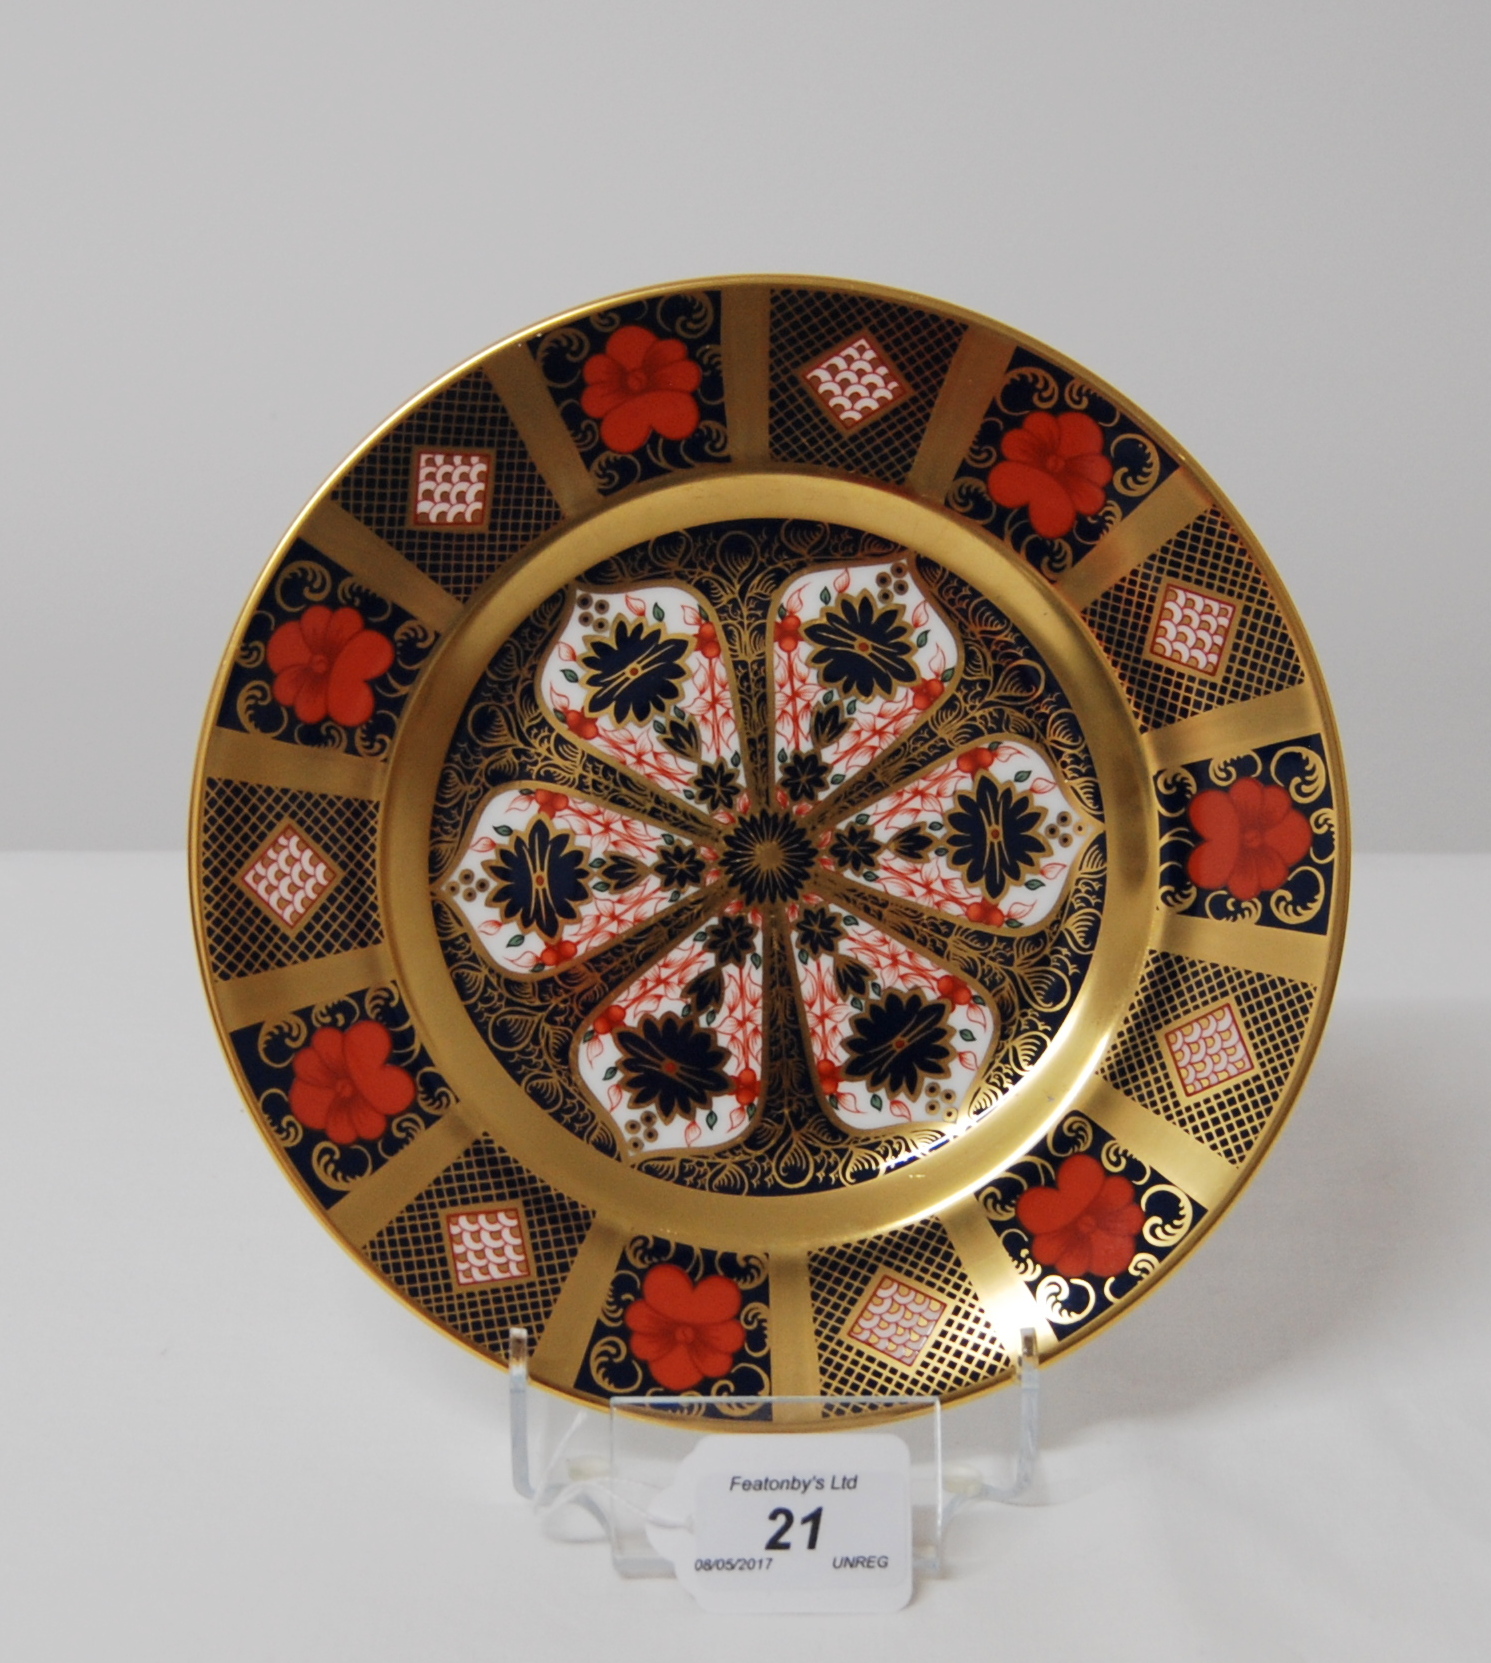 FIRST QUALITY ROYAL CROWN DERBY OLD IMARI SGB NO.1128 PLATE,DATE CODE MMVIII (2008), 21.